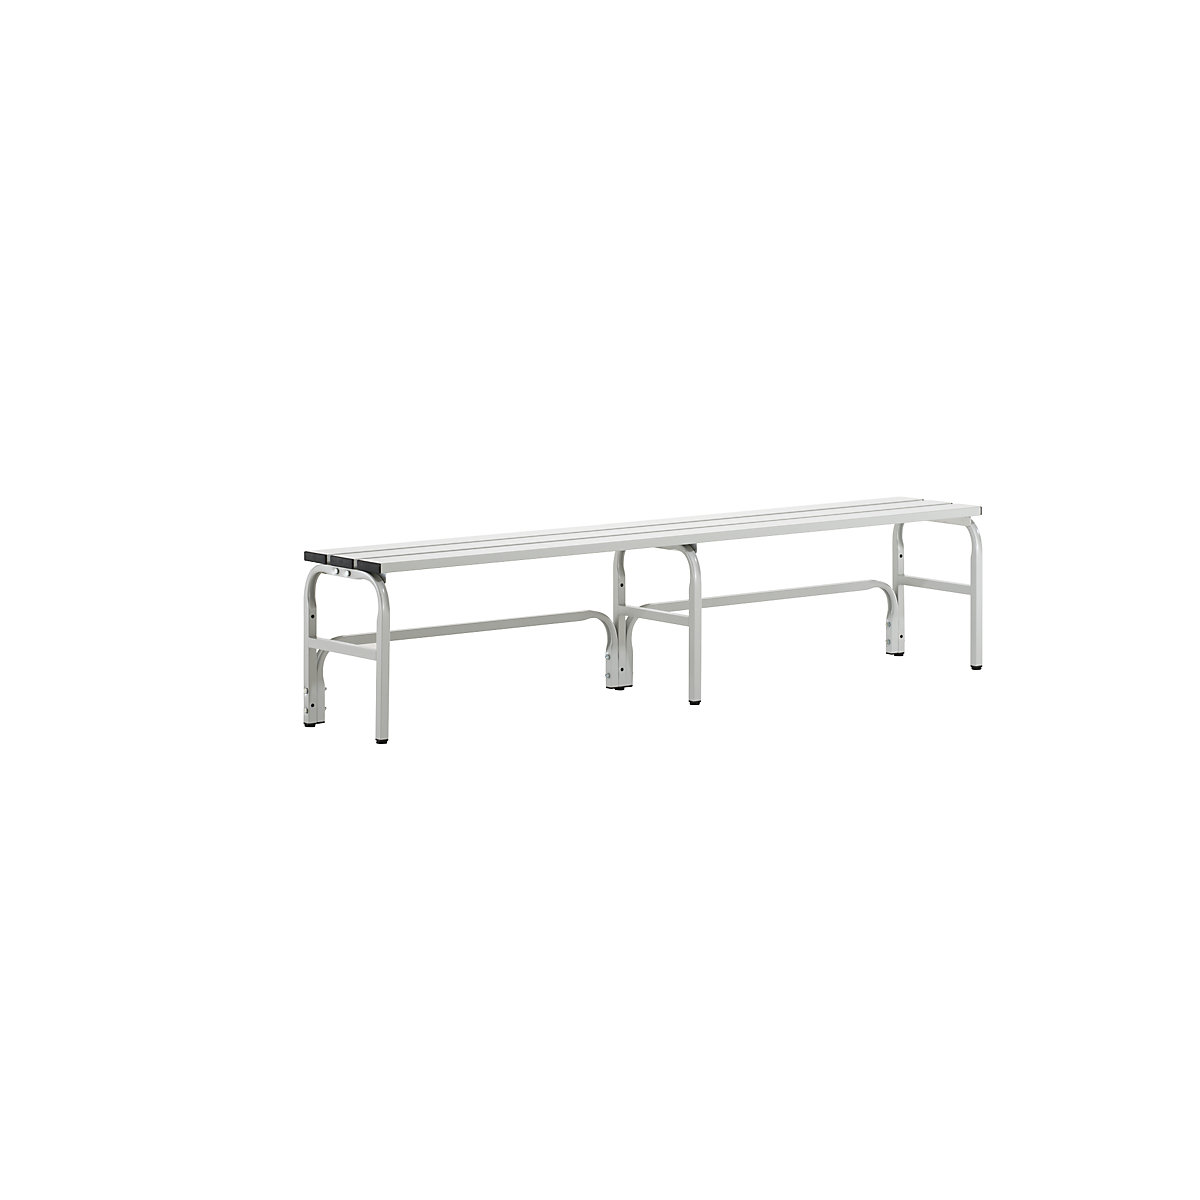 Sypro – Changing room bench made of stainless steel, HxD 450 x 350 mm, length 1500 mm, light grey